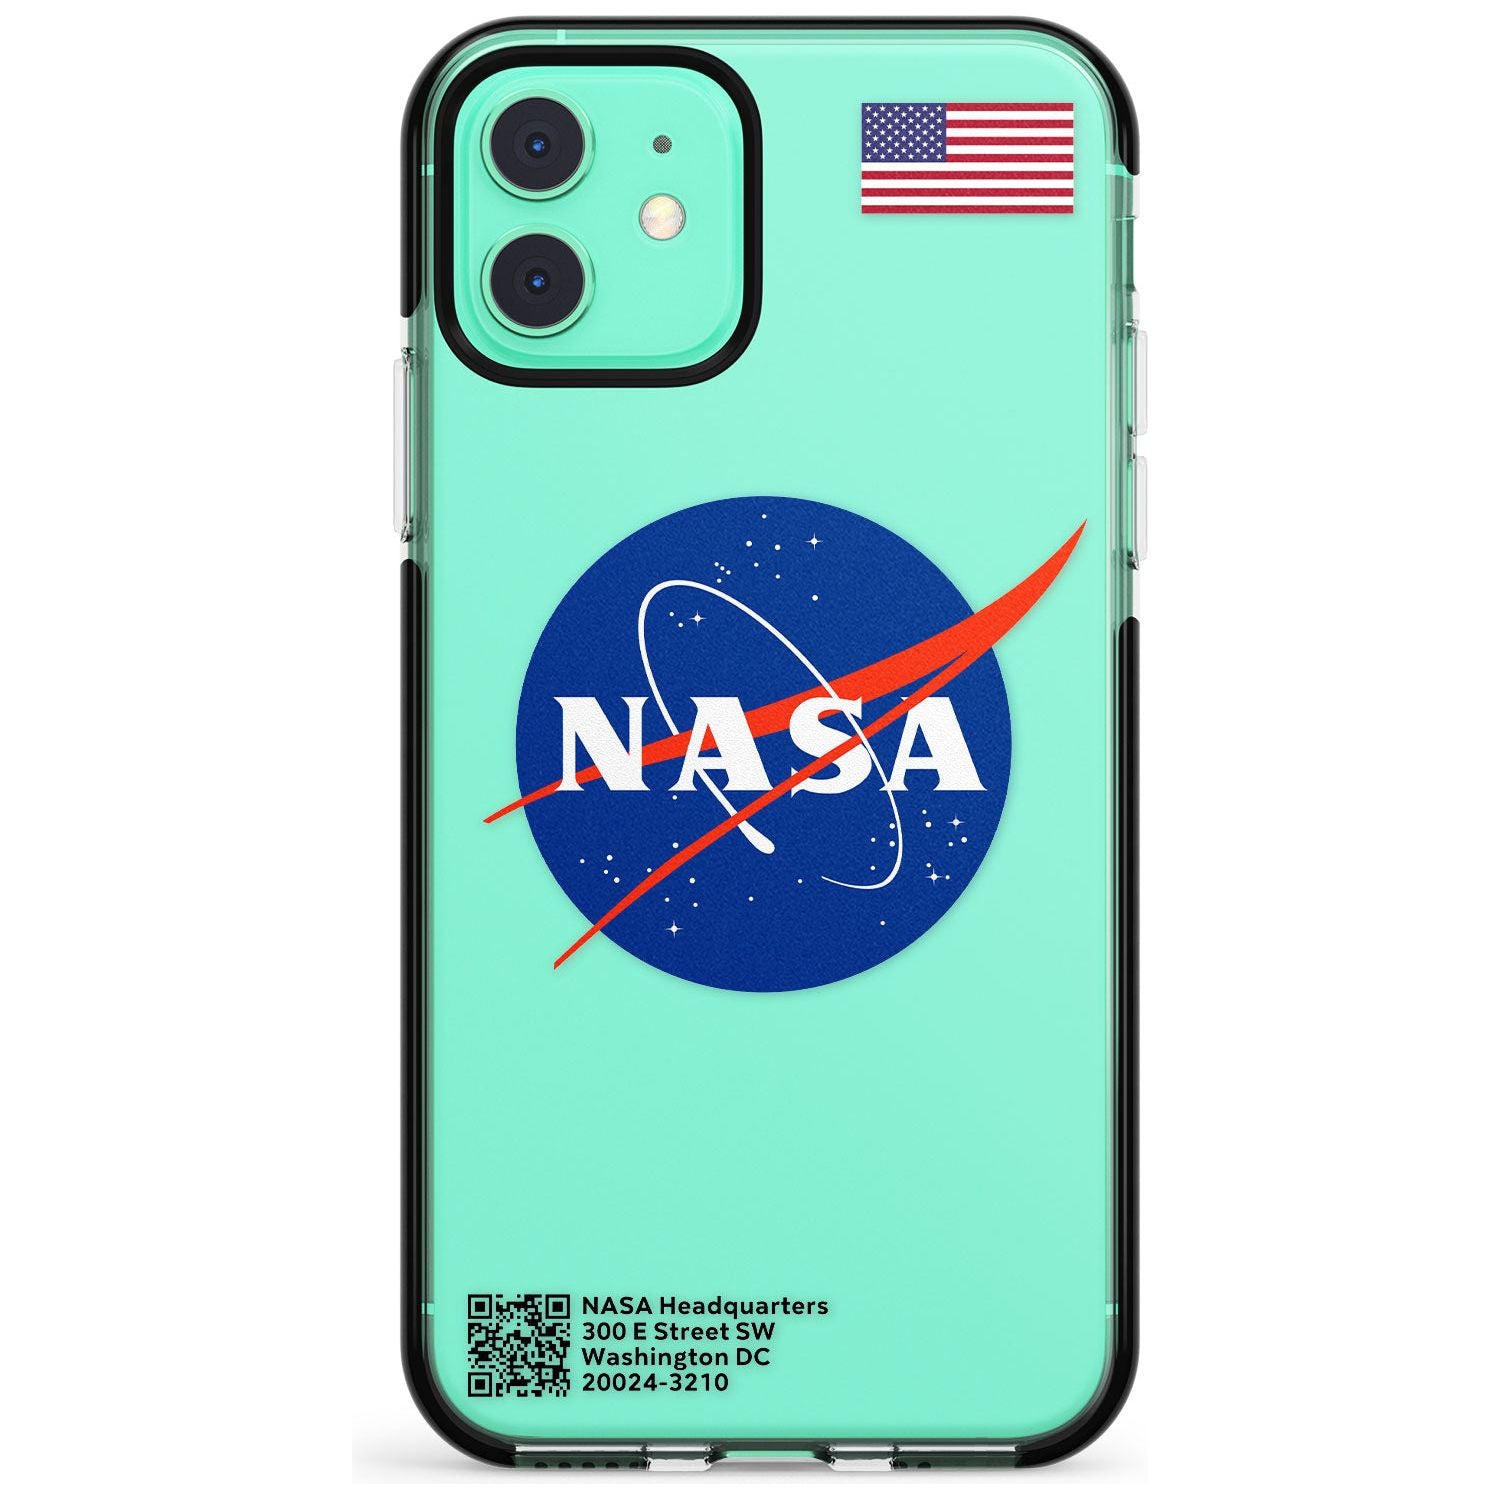 NASA Meatball Black Impact Phone Case for iPhone 11 Pro Max